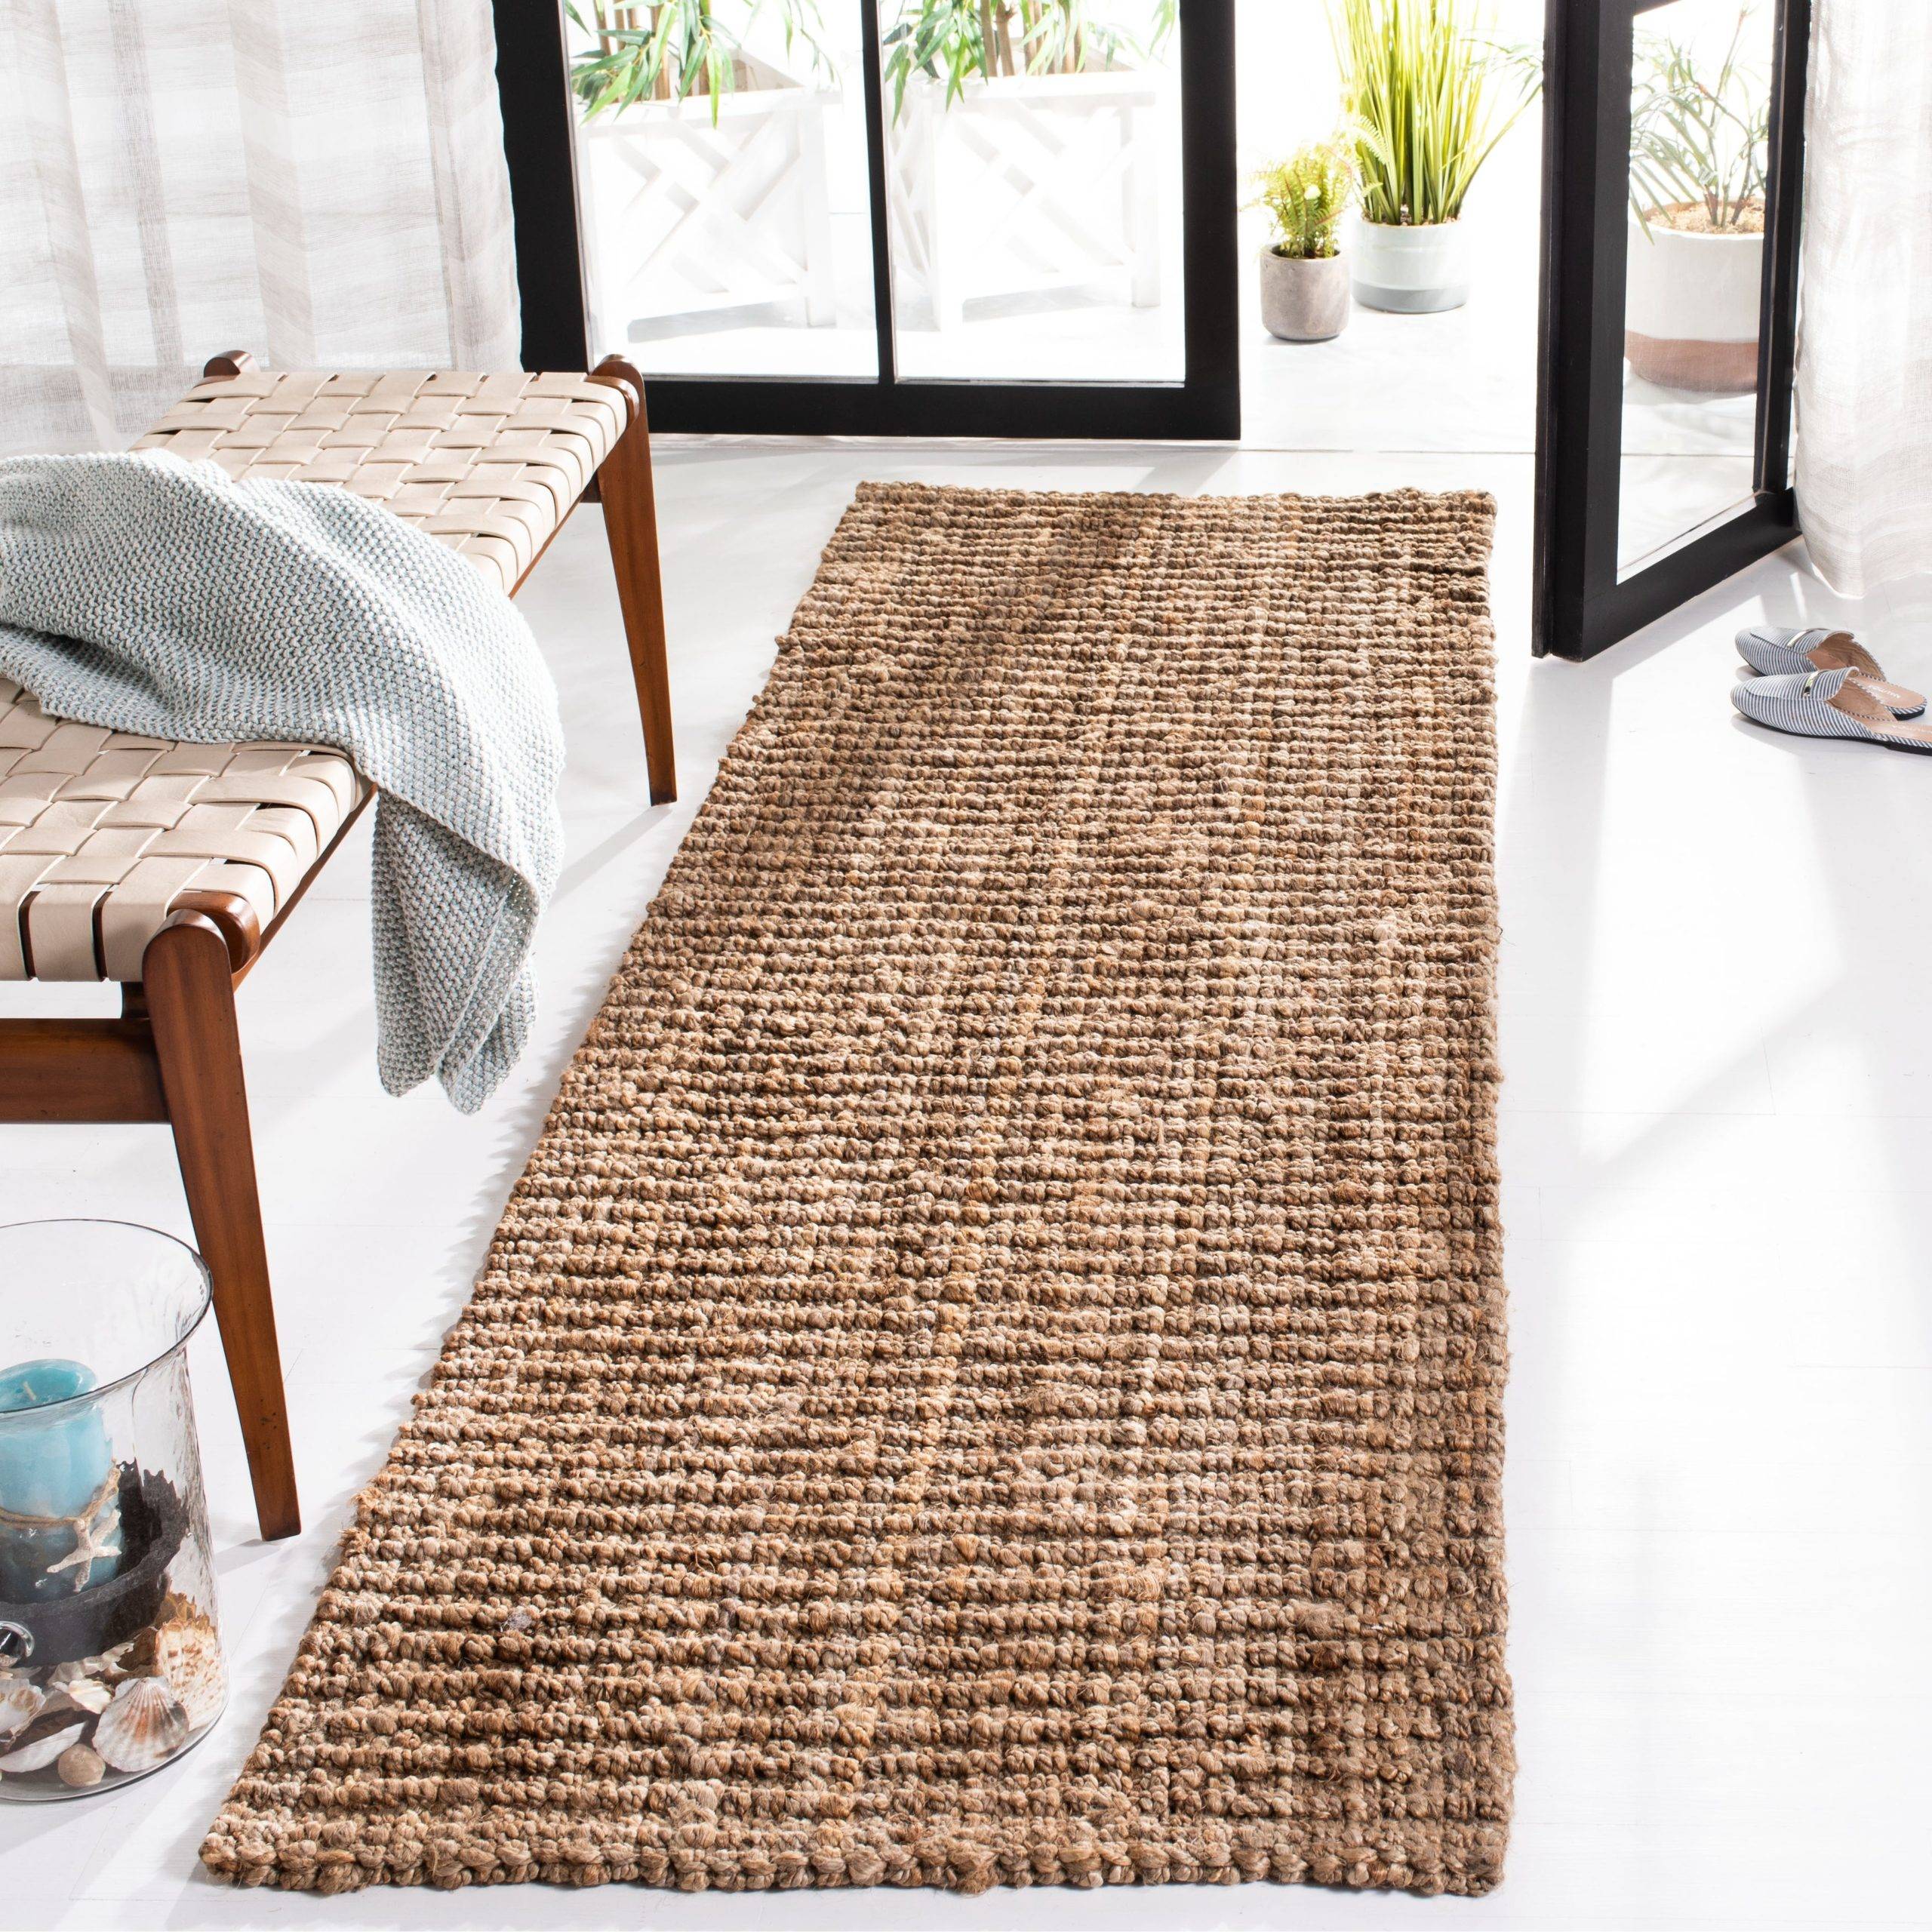 15 Tips When Looking For Entryway Rugs, Best Entry Rug